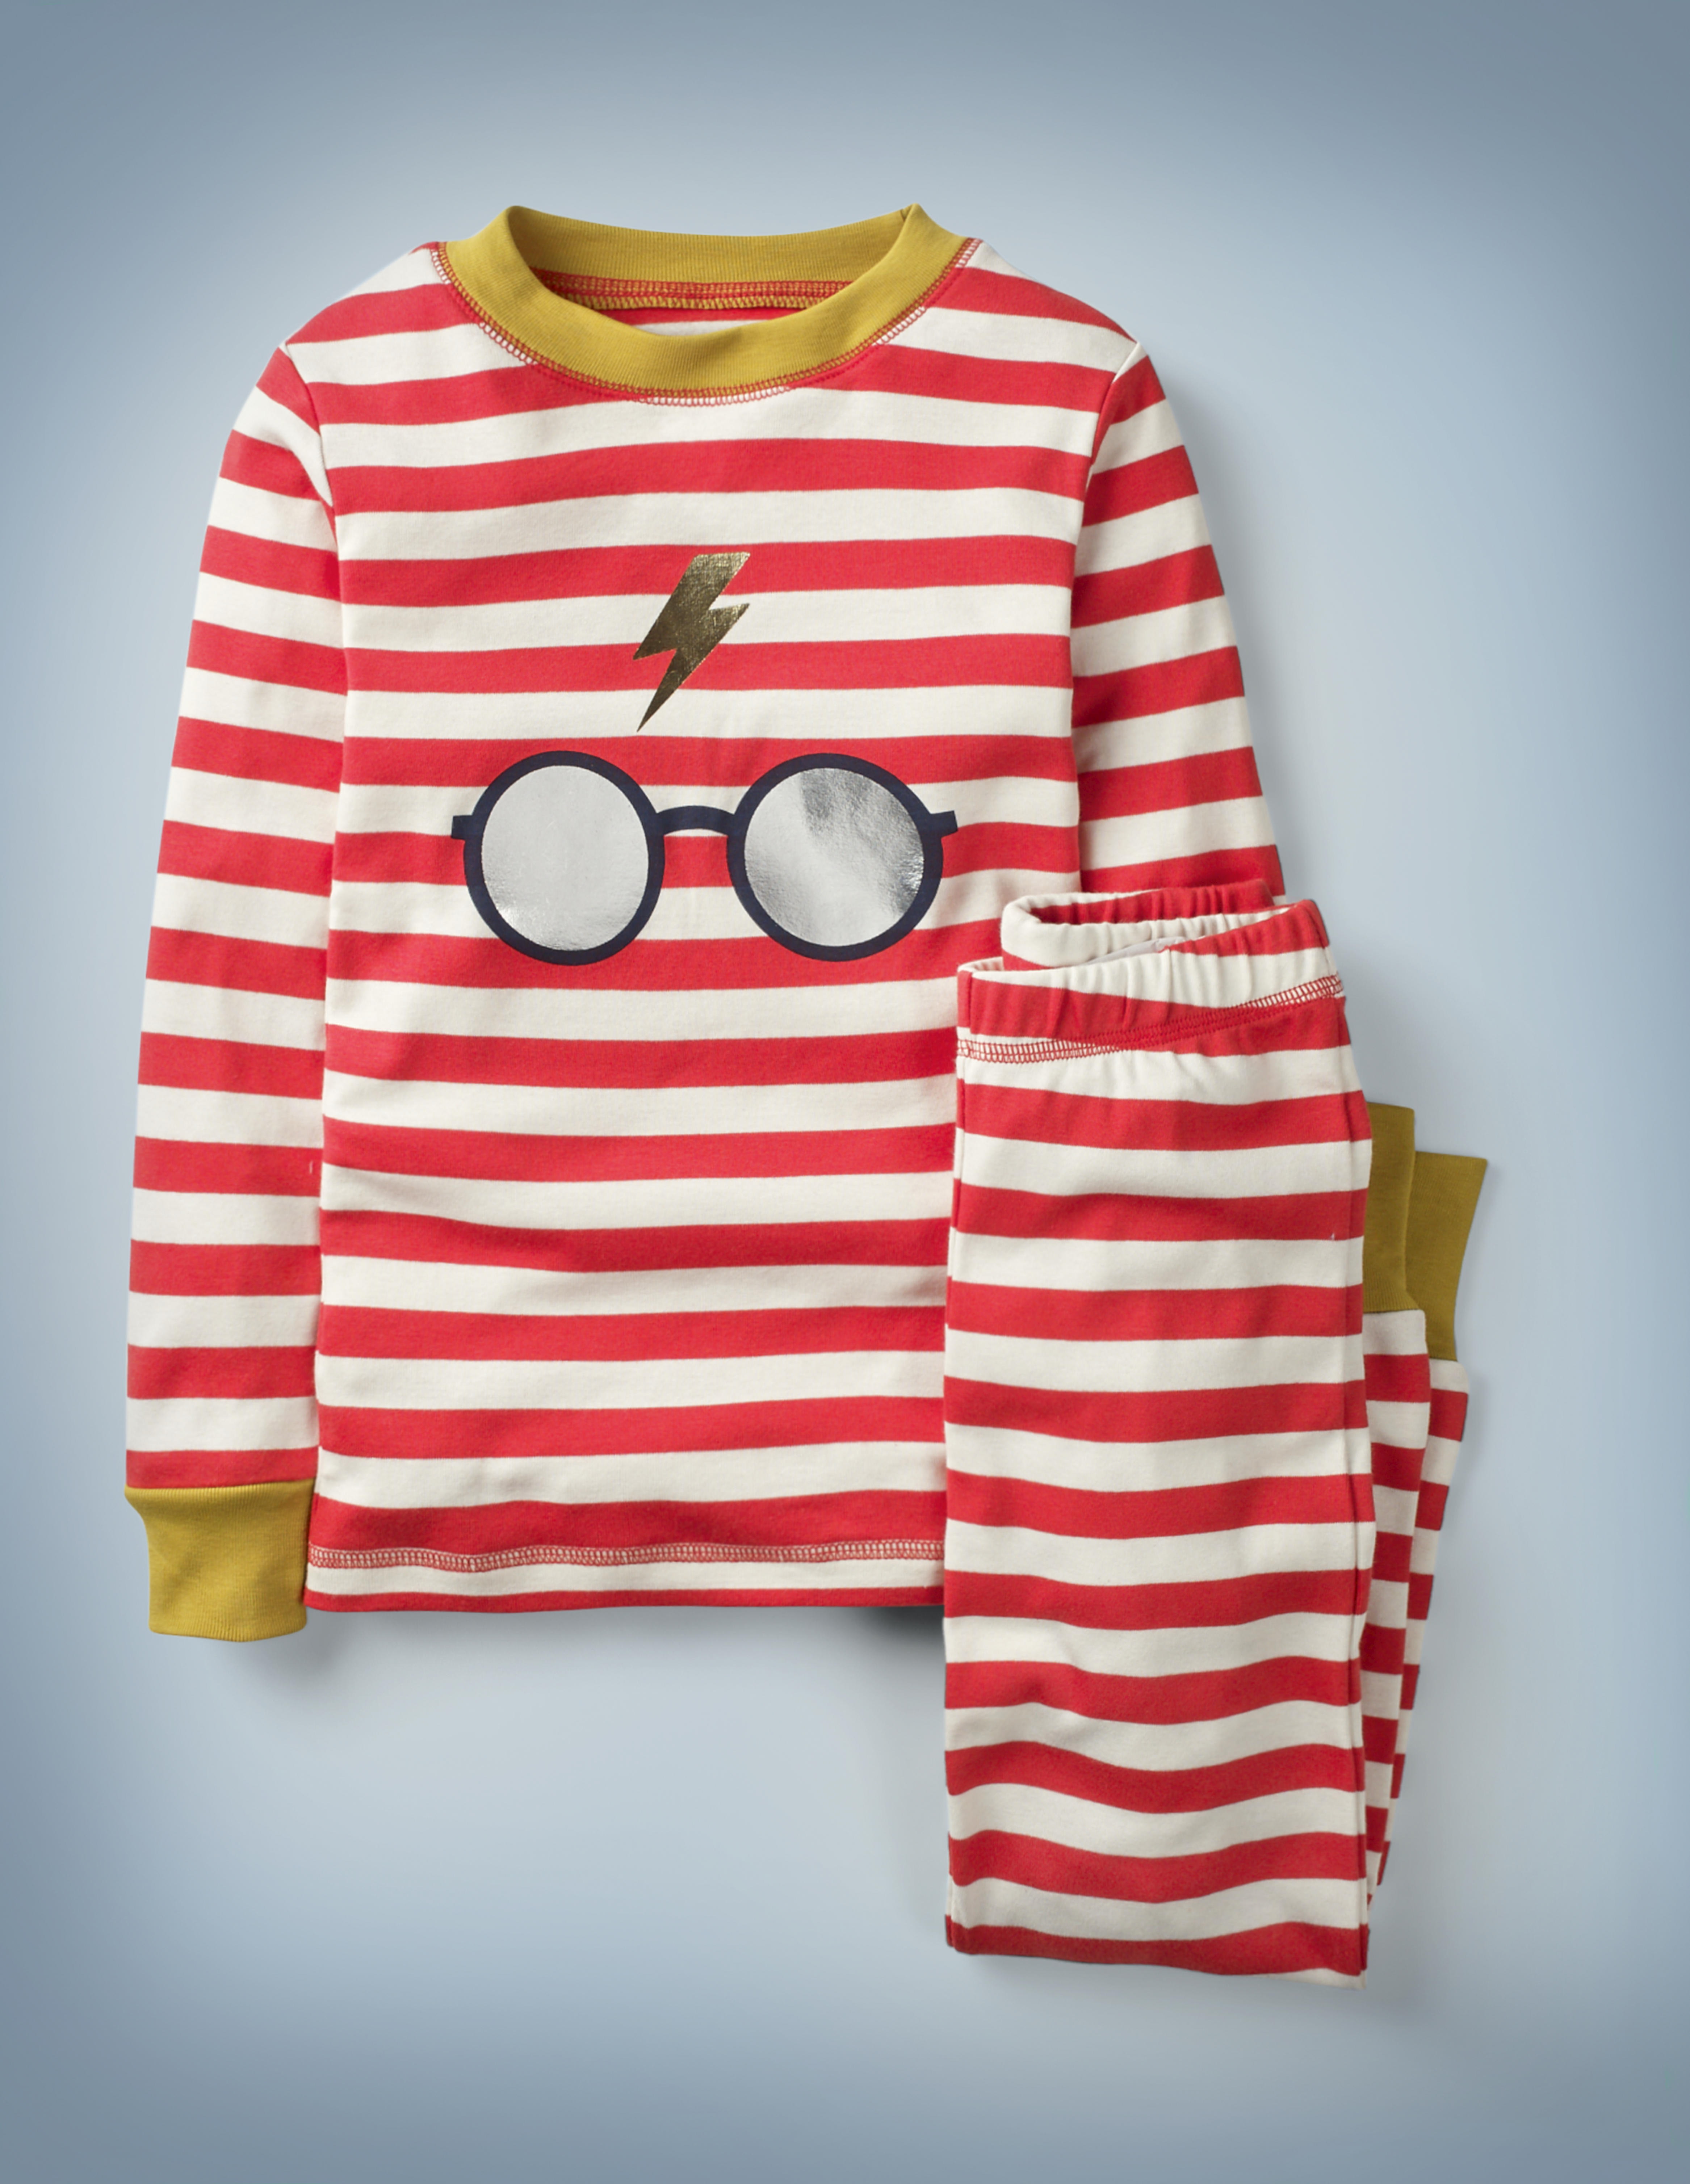 The Mini Boden Harry Potter Long John Pyjamas in red feature all-over red-and-white stripes with gold collar and cuffs, as well as a large central design of Harry Potter’s glasses and lightning bolt scar. The top-and-bottom set retails at £24.